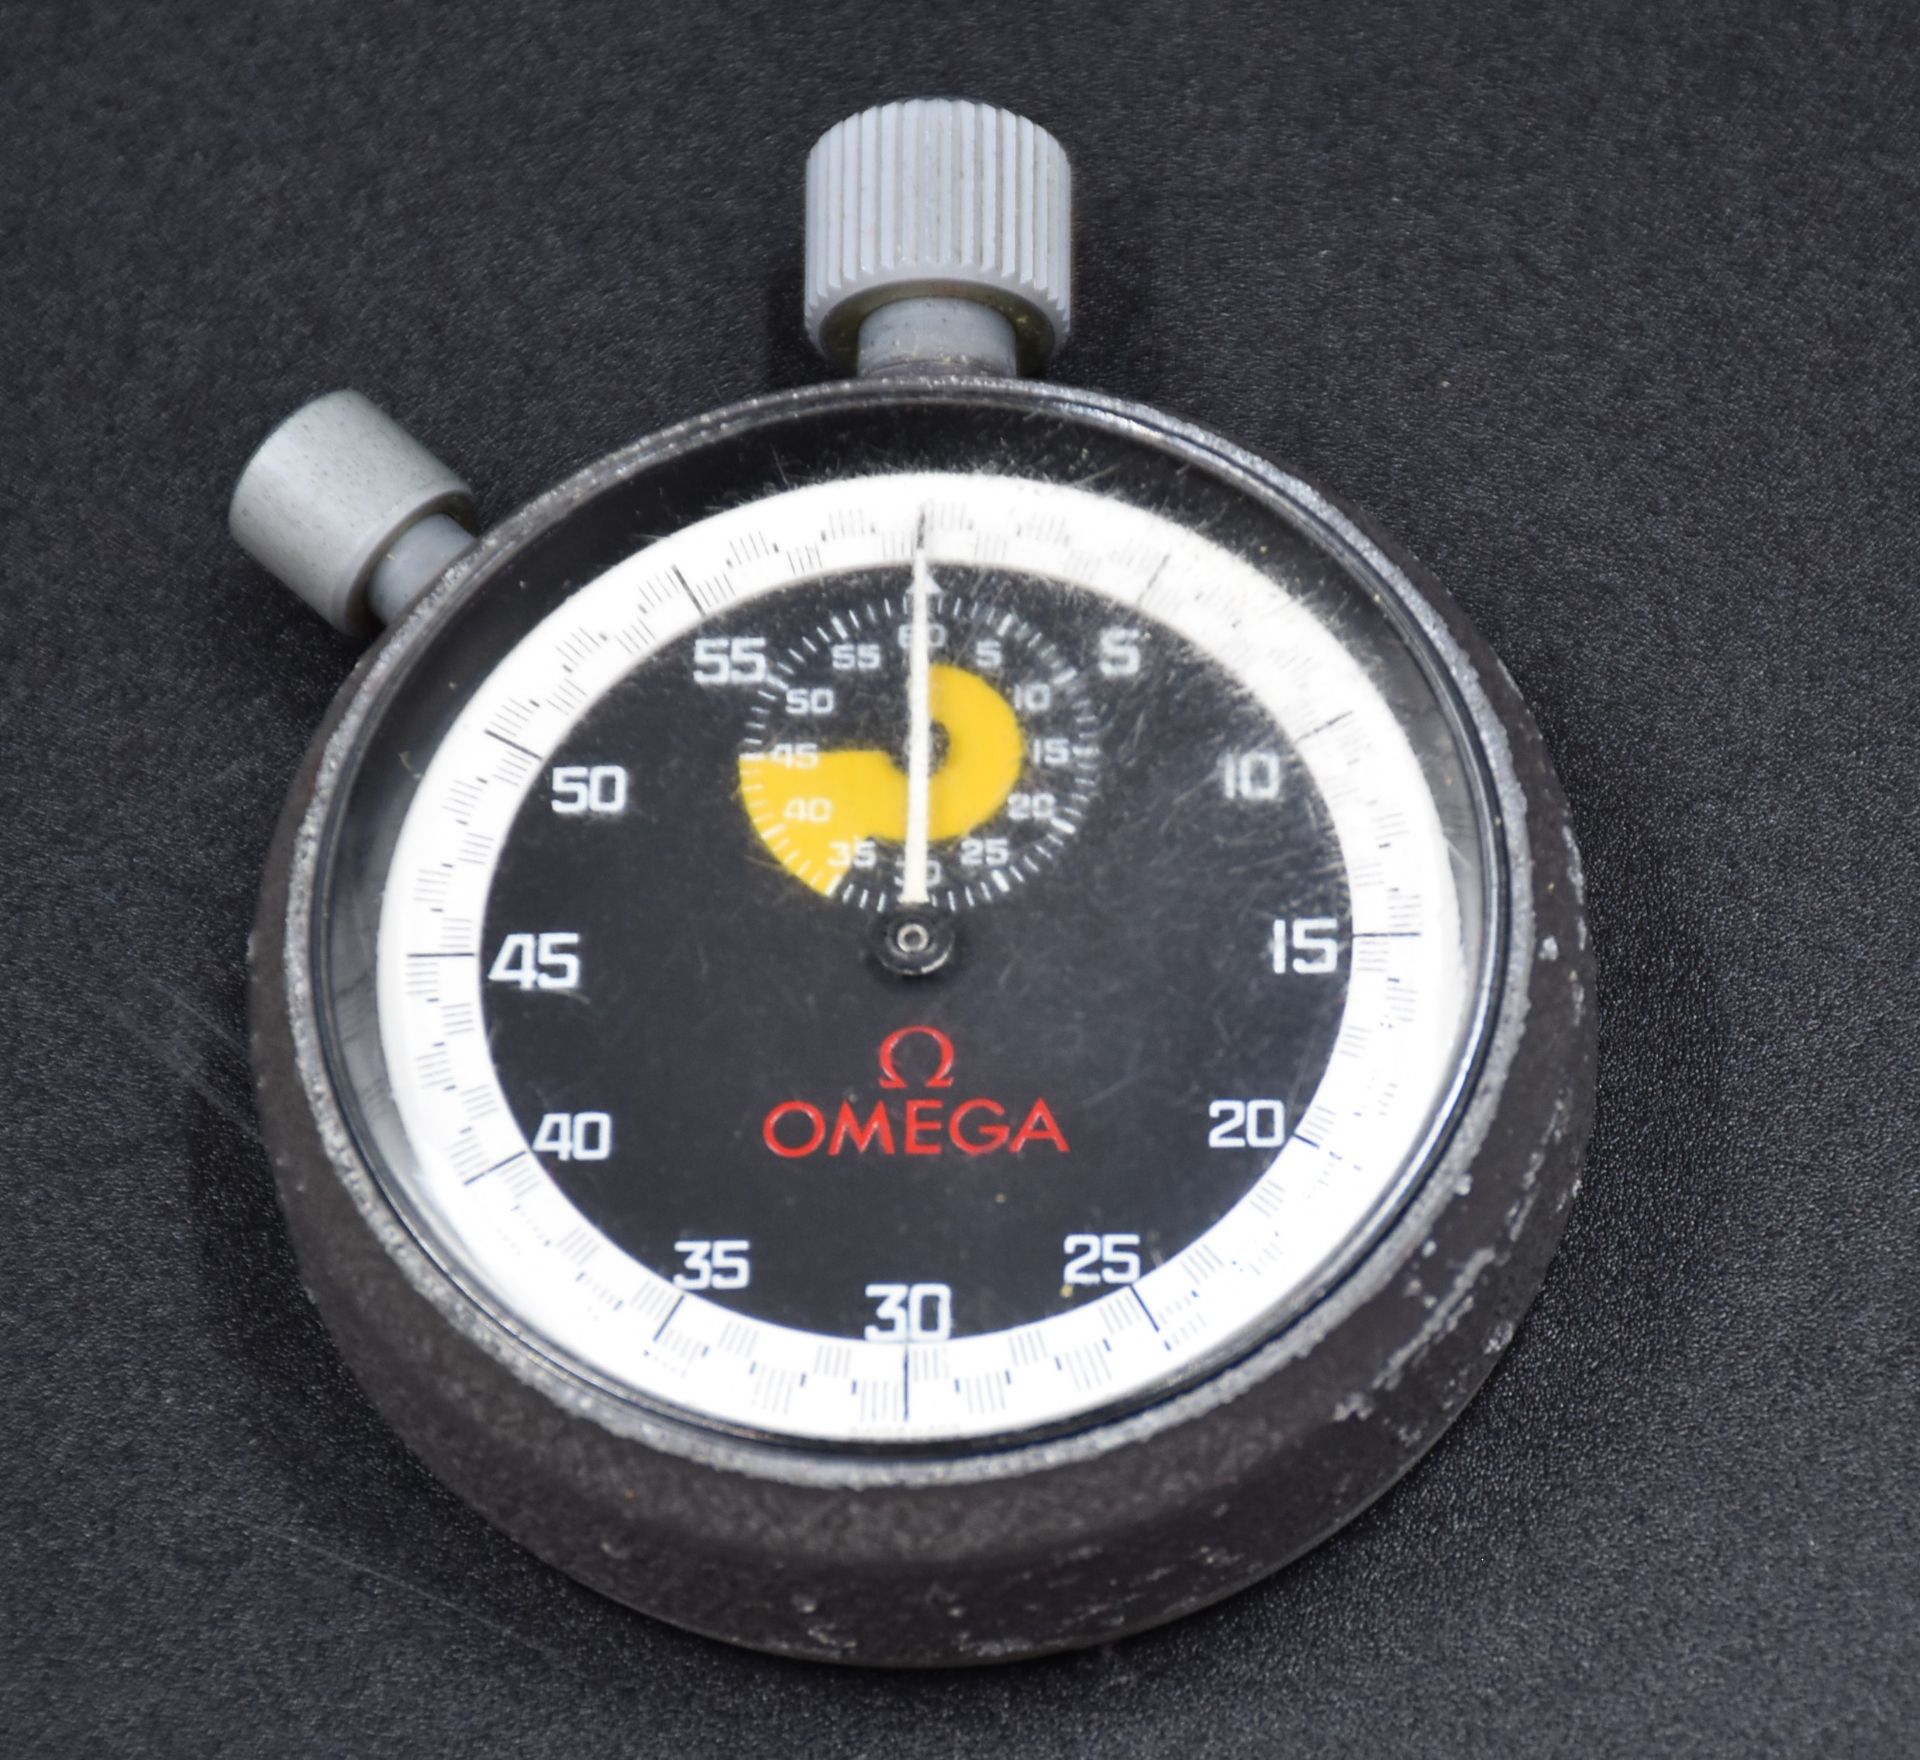 Omega chronometer in its box. Circa 1970. - Image 2 of 4